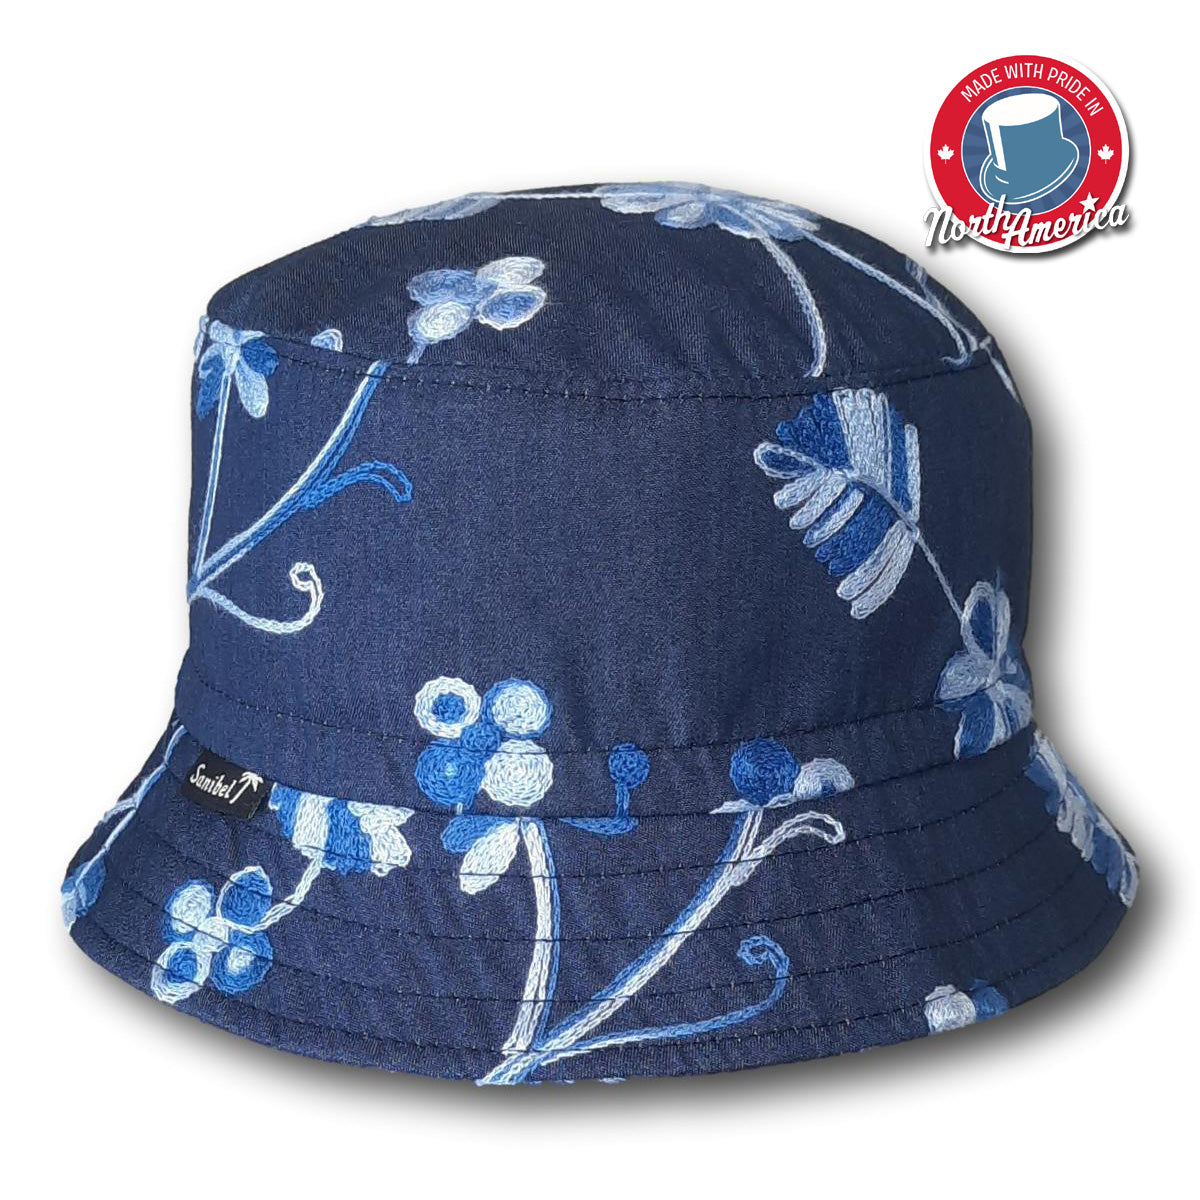 Embroidered Floral Bucket